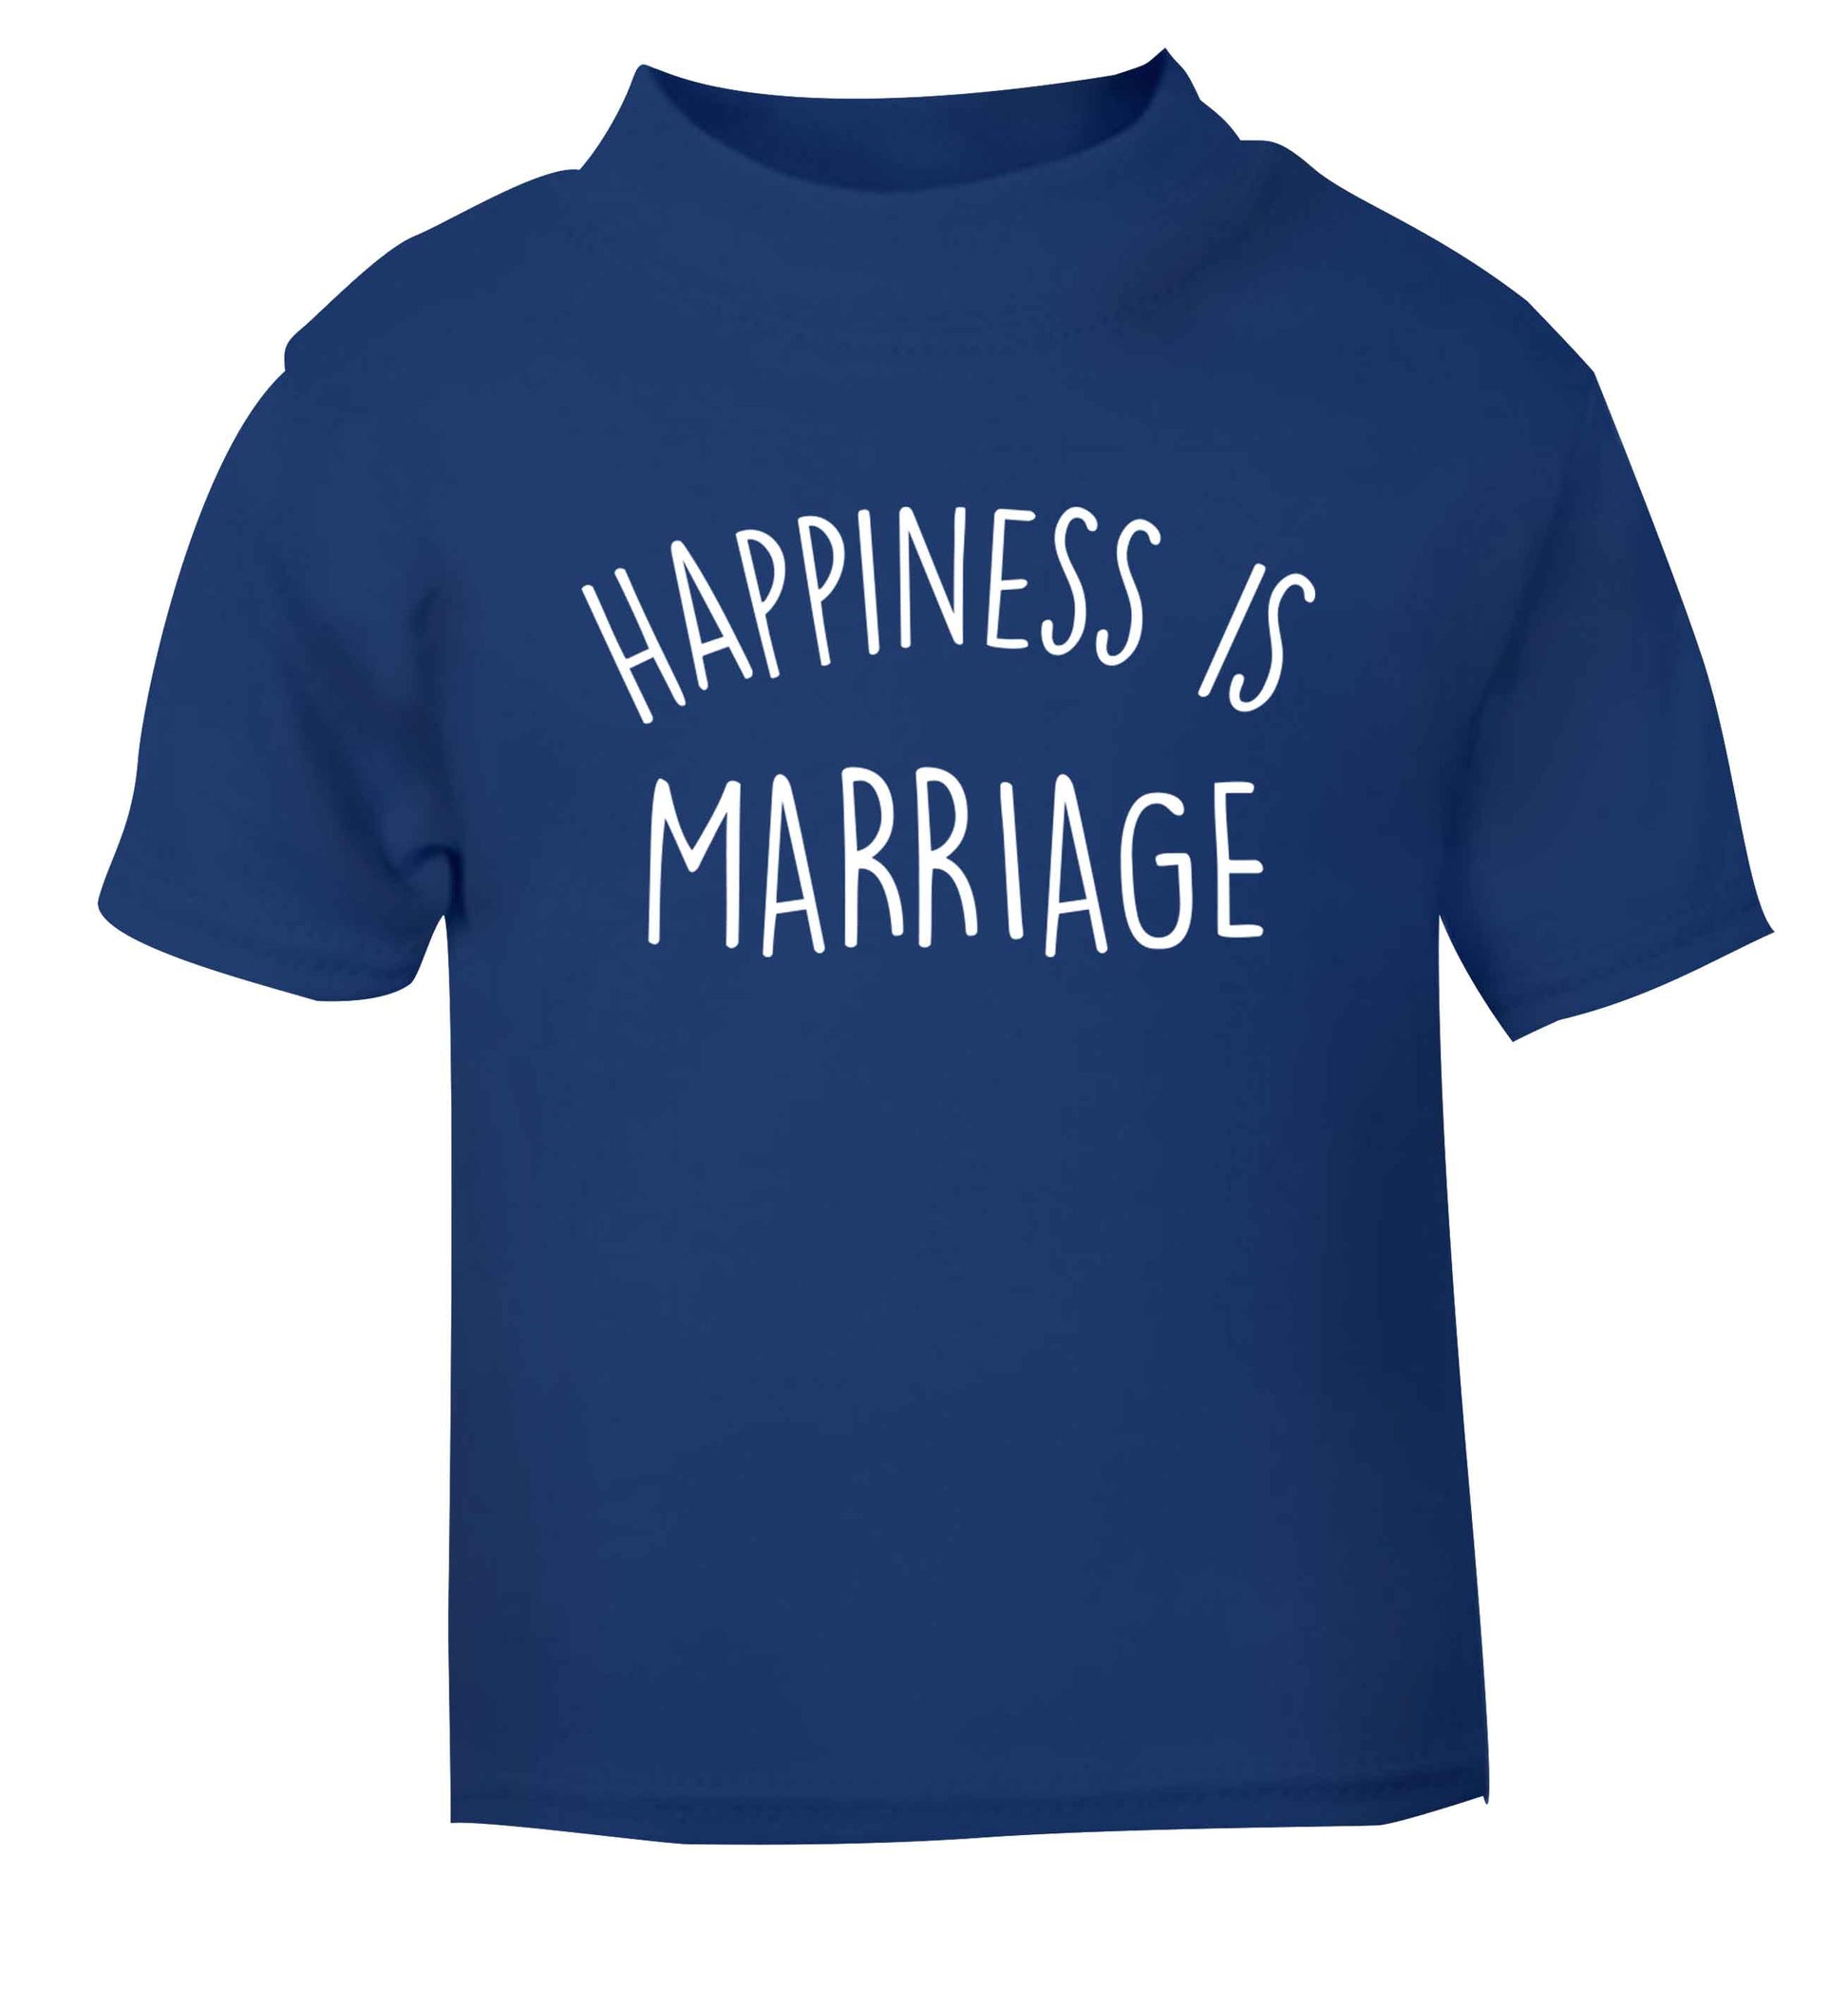 Happiness is wedding planning blue baby toddler Tshirt 2 Years